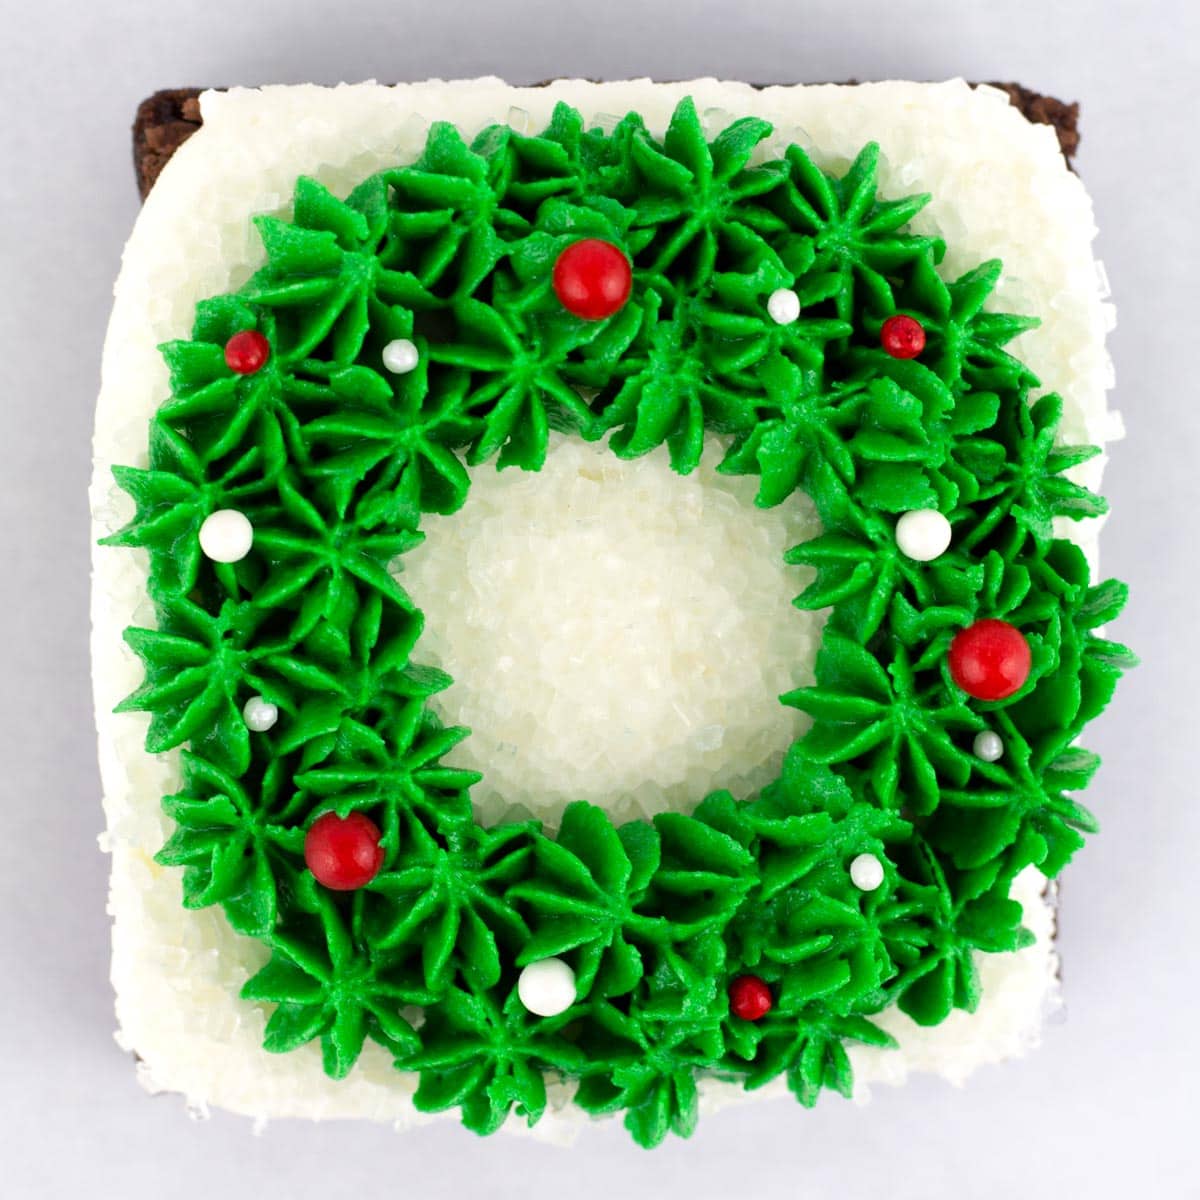 A square brownie with a Christmas wreath piped on top and decorated with red and white sprinkles.